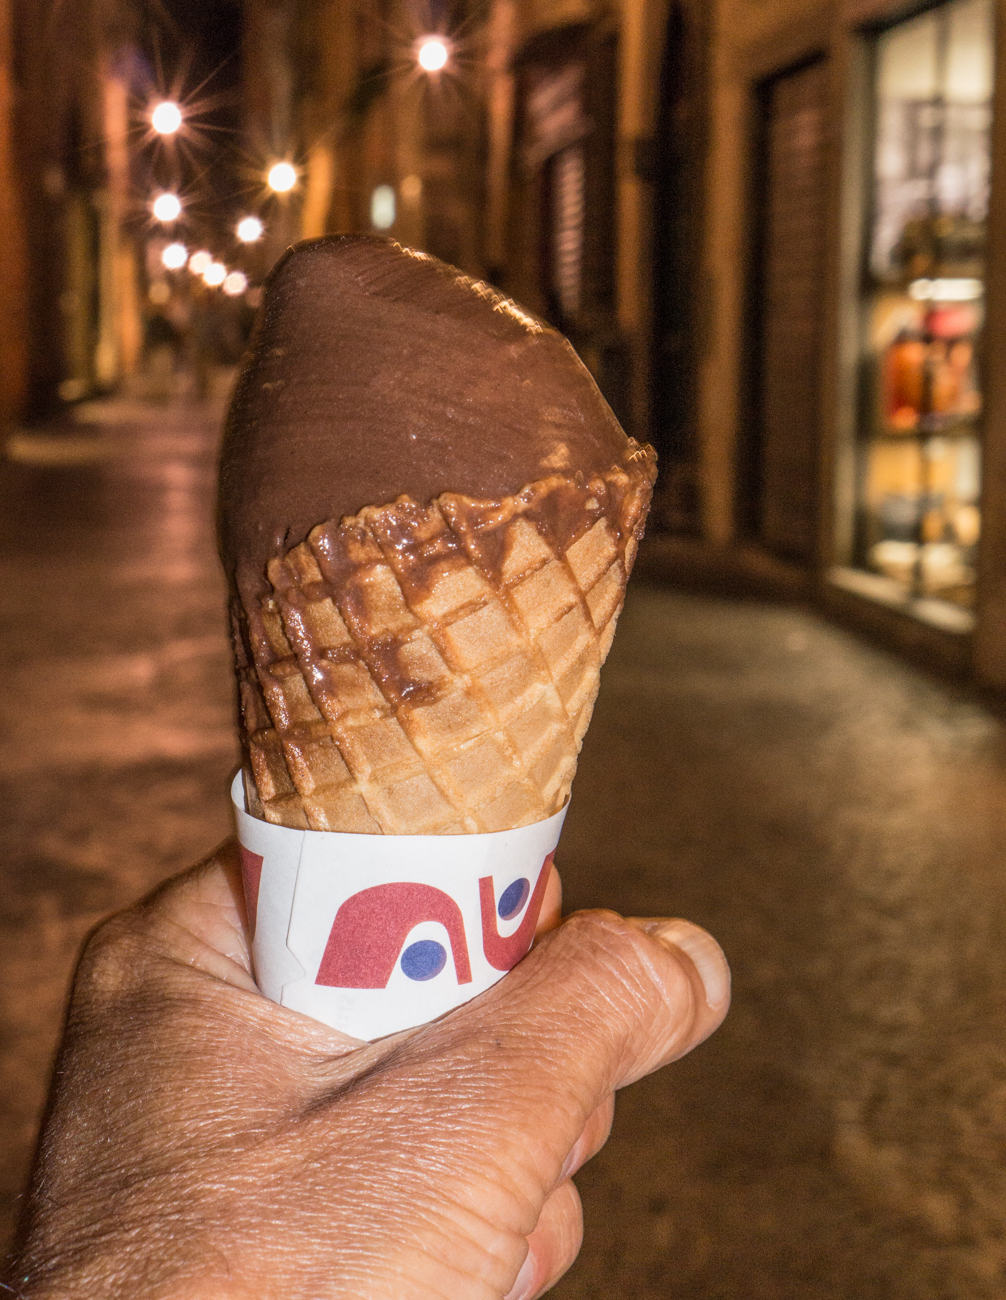 The photographer enjoys a vegan chocolate gelato in Lucca, Italy | Photo by Mike Hudak